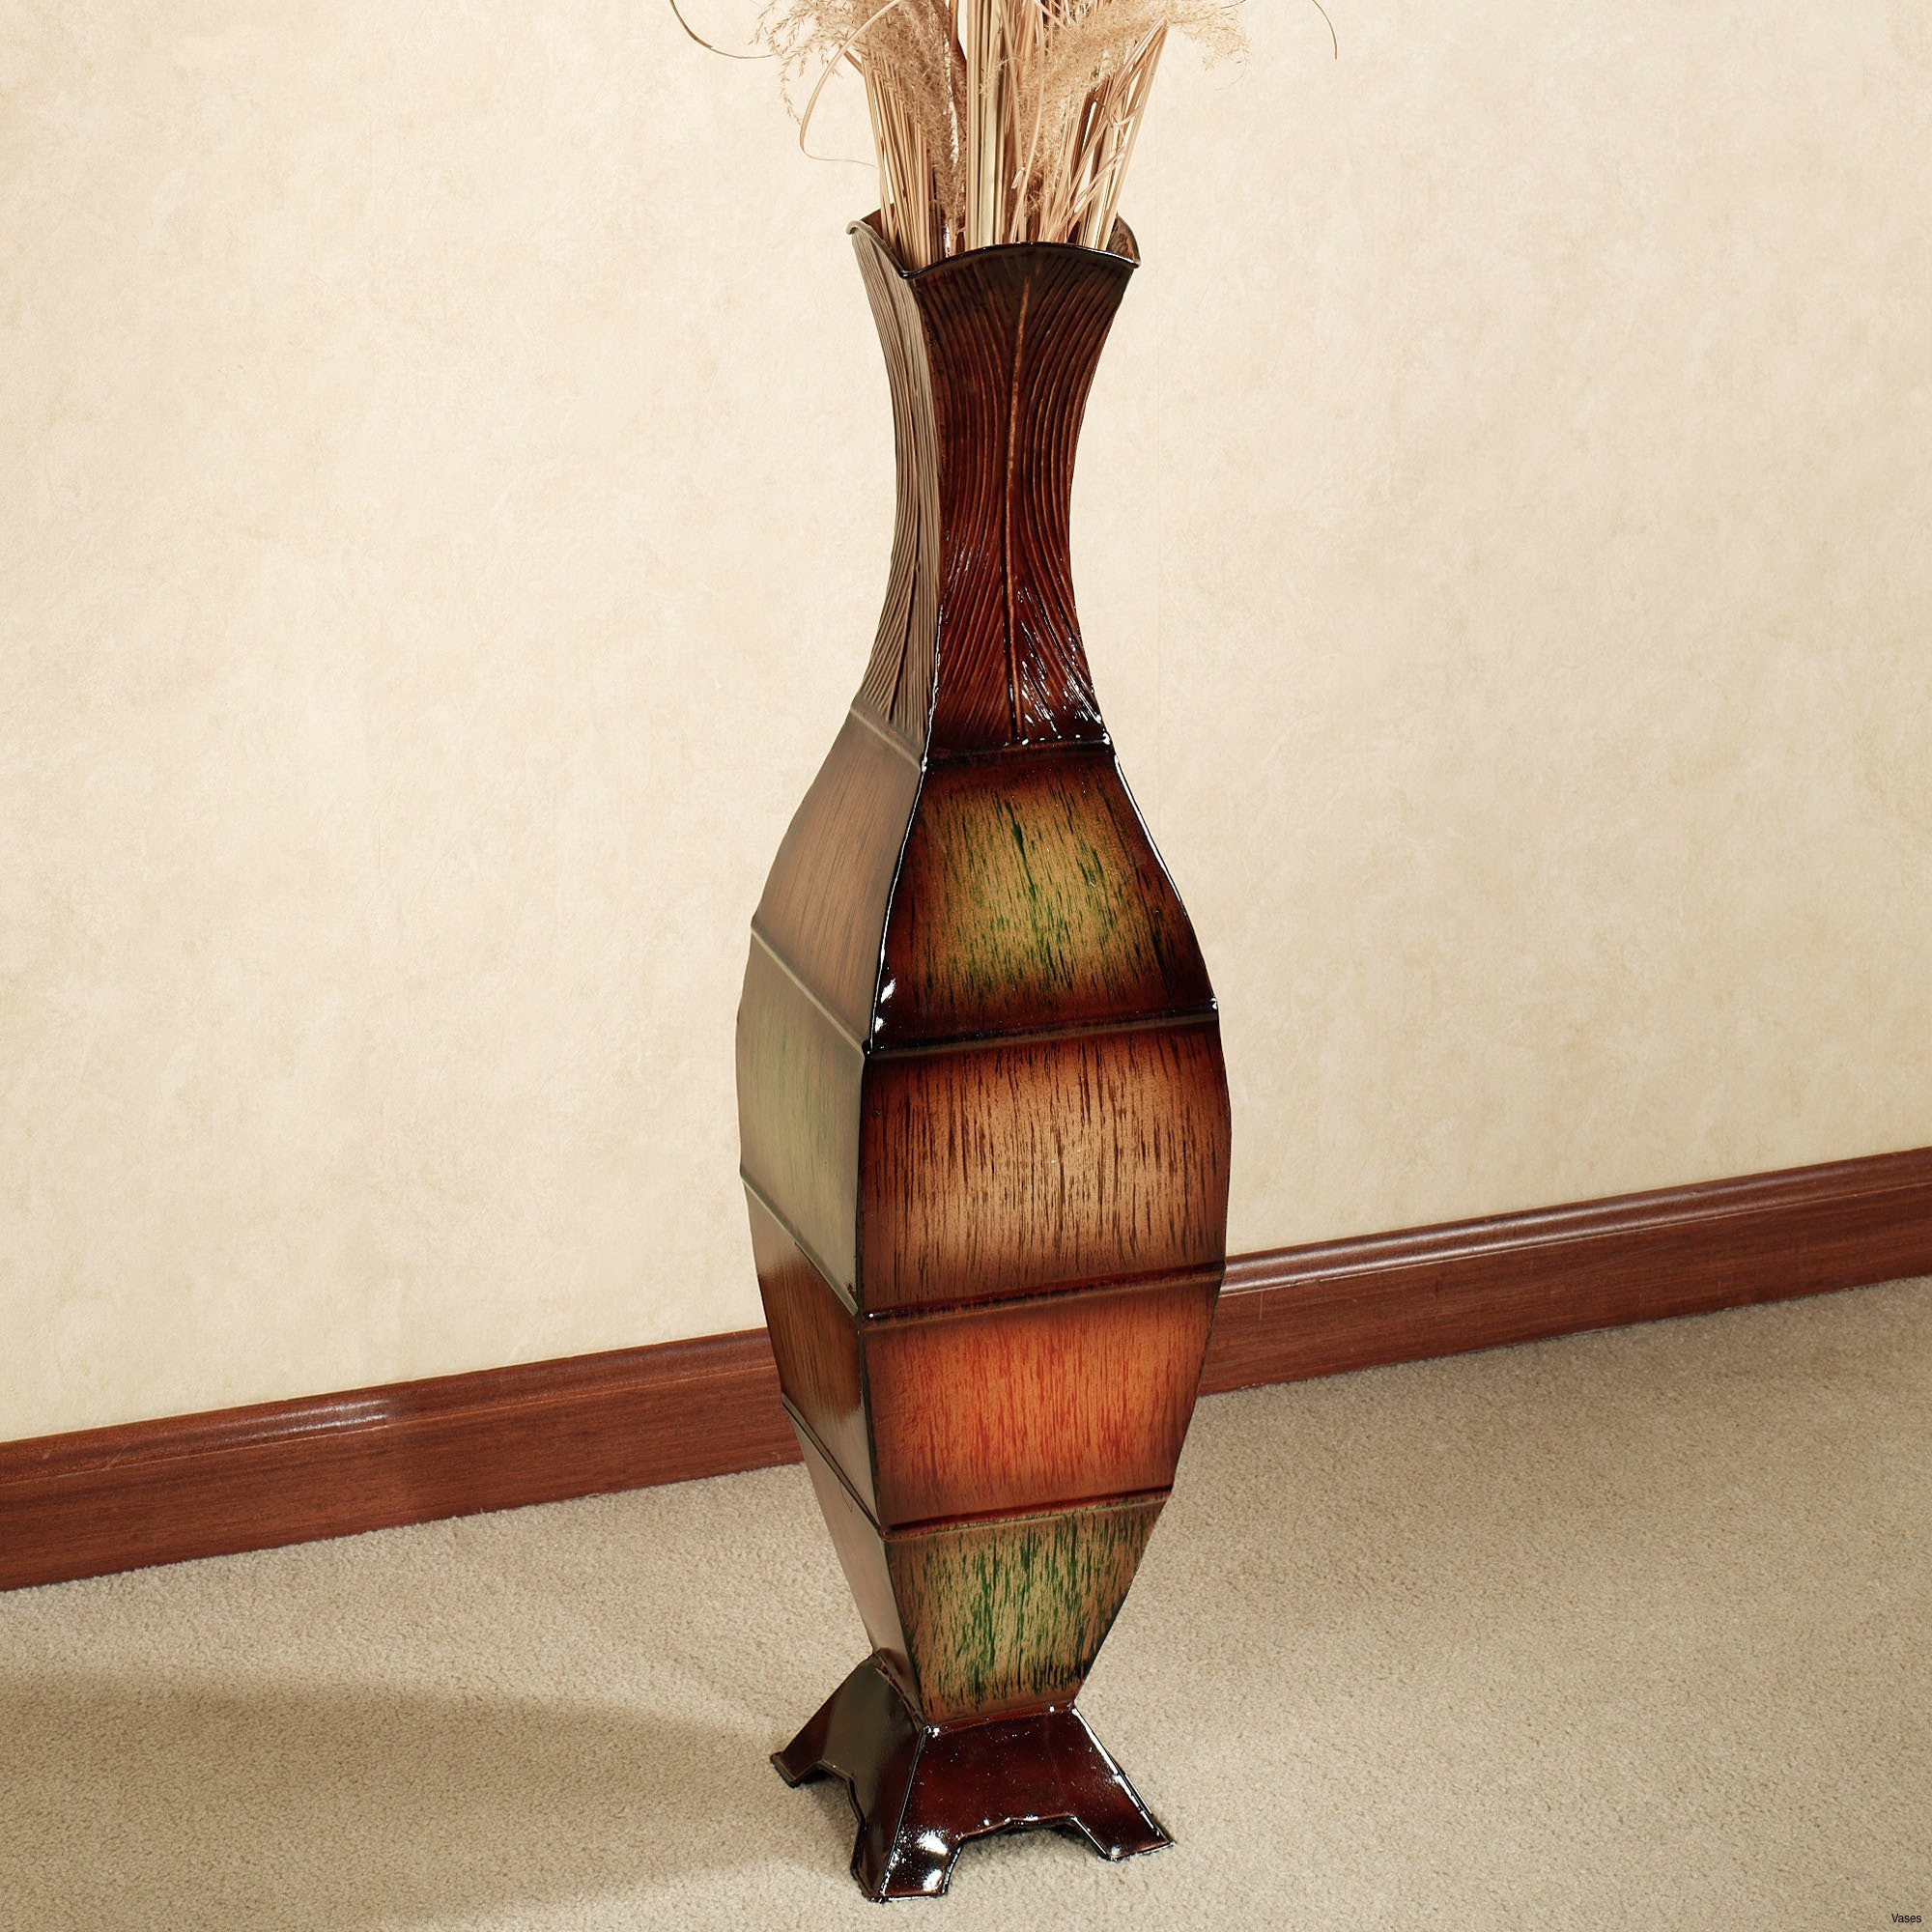 28 Fantastic Vase for Bamboo Plant 2024 free download vase for bamboo plant of 10 best of bamboo vase bogekompresorturkiye com for lamps floor contemporary new luxury contemporary floor vasesh vases cheap vasesi 5d bamboo lamps floor